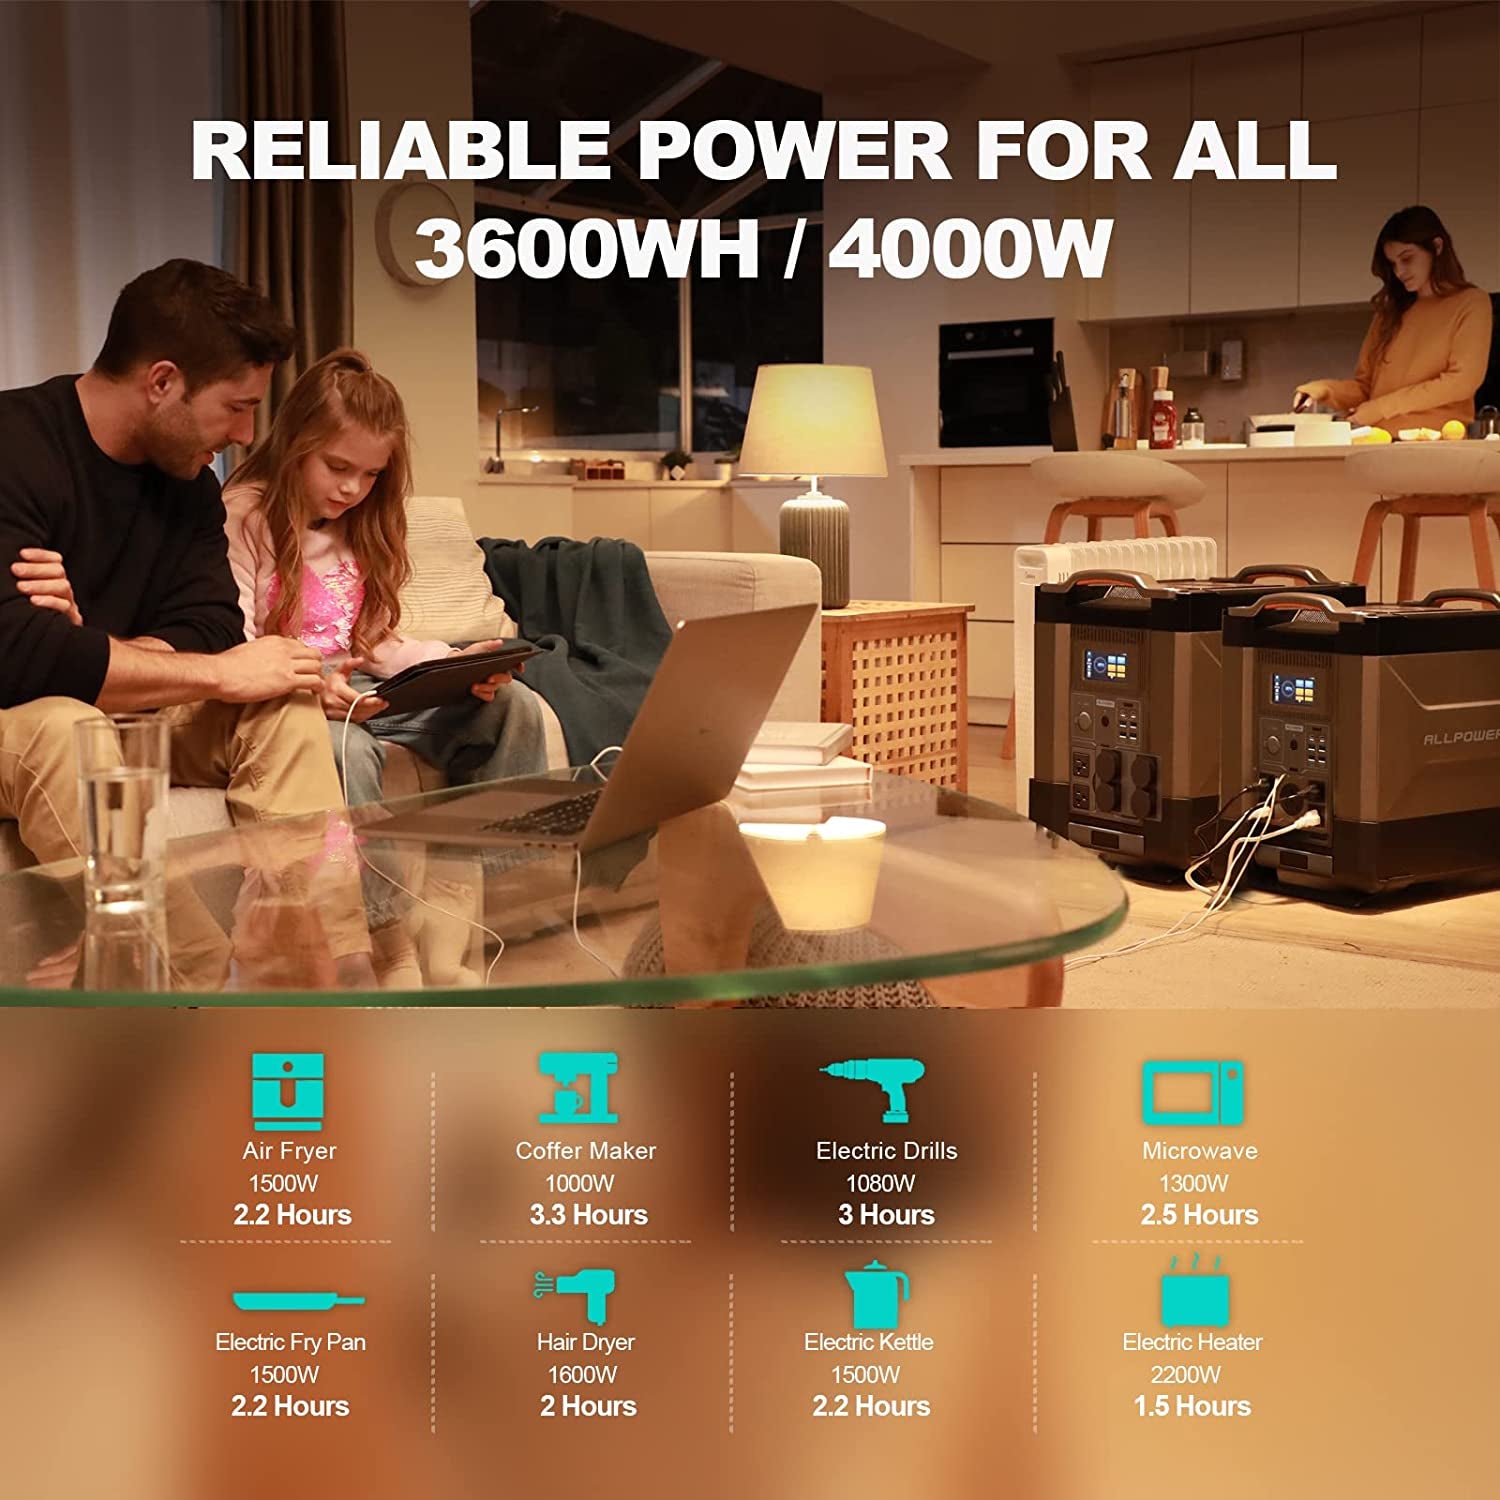 R4000 Lifepo4 Battery, 3600Wh Power Station 4000W Portable Generator, Expandable Battery for Power Outage, Travel，Ups